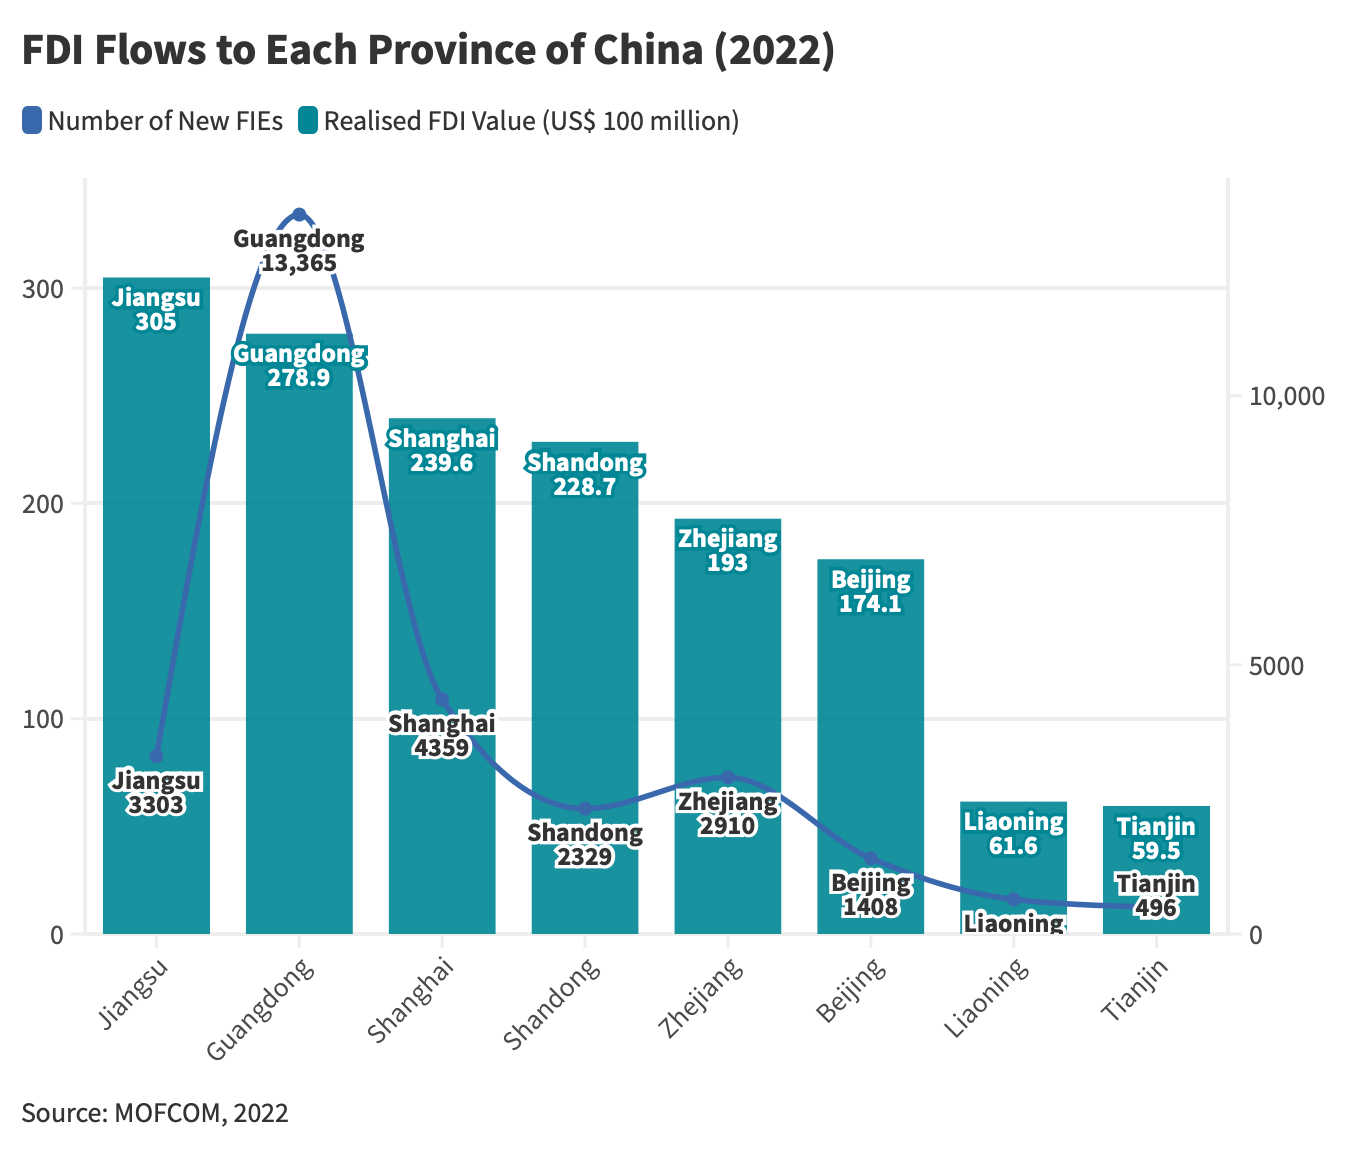 FDI-Flows-to-Each-Province-of-China-2022